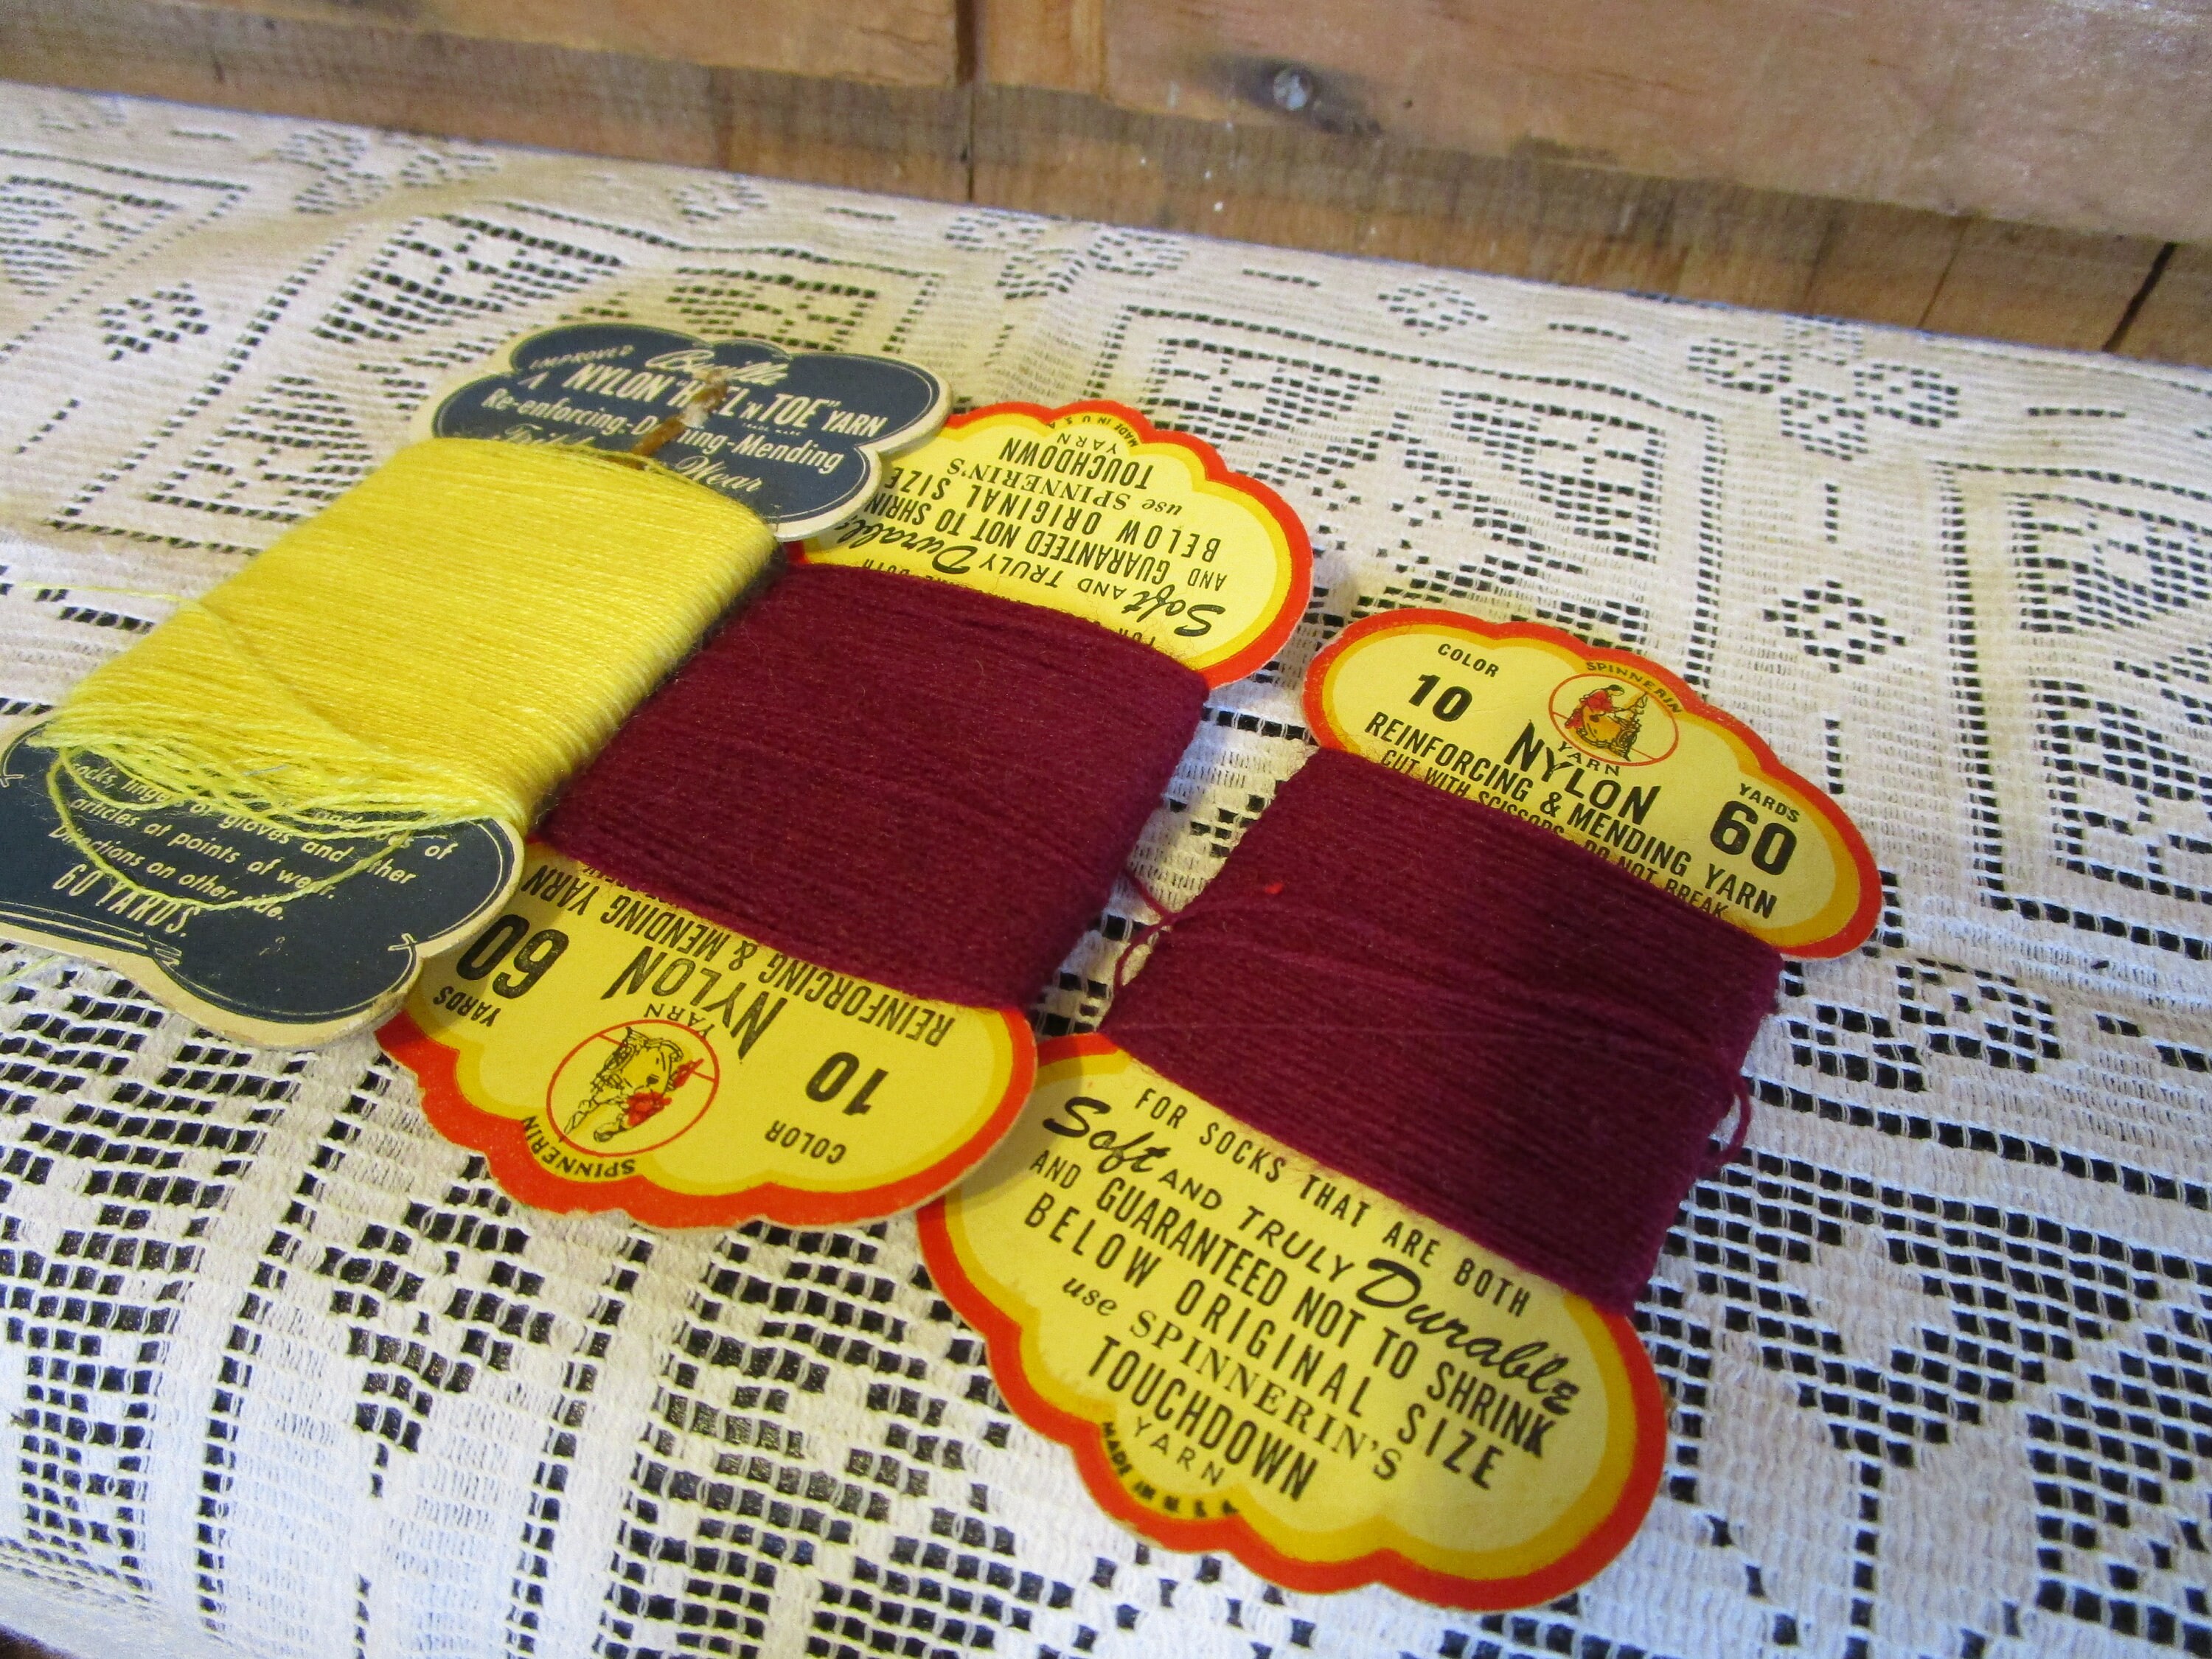 Darning Thread, Reinforcing and Mending Nylon Yarn, Spinnerins and Bucilla,  60 Yards, Lot of 3 Cards Maroon and Yellow. Vintage 1960s. 